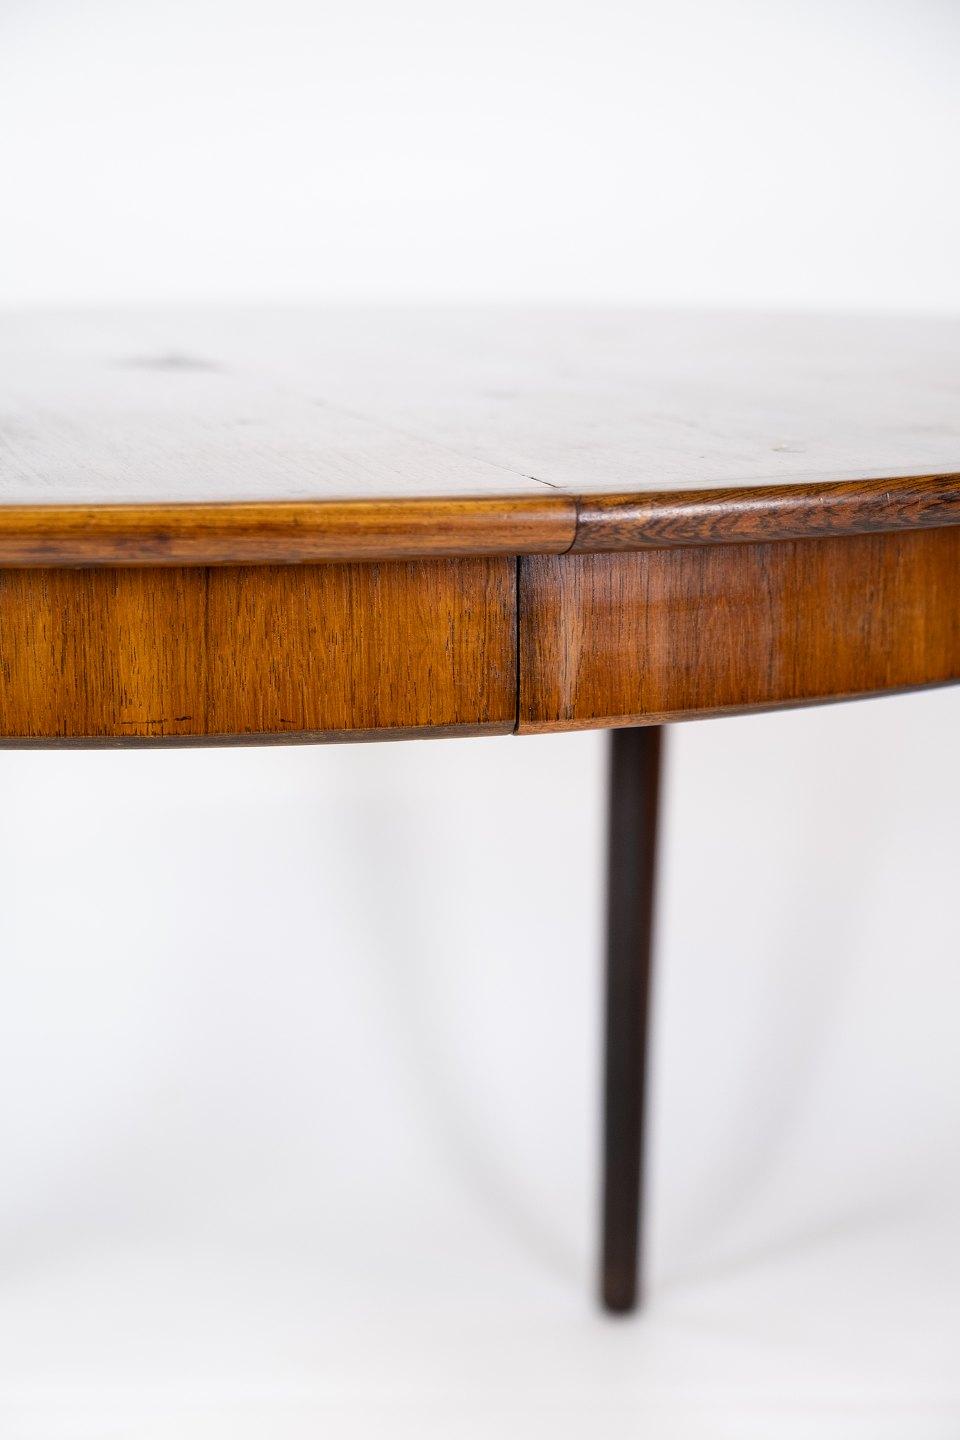 Scandinavian Modern Dining Table in Rosewood Designed by Arne Vodder from the 1960s For Sale